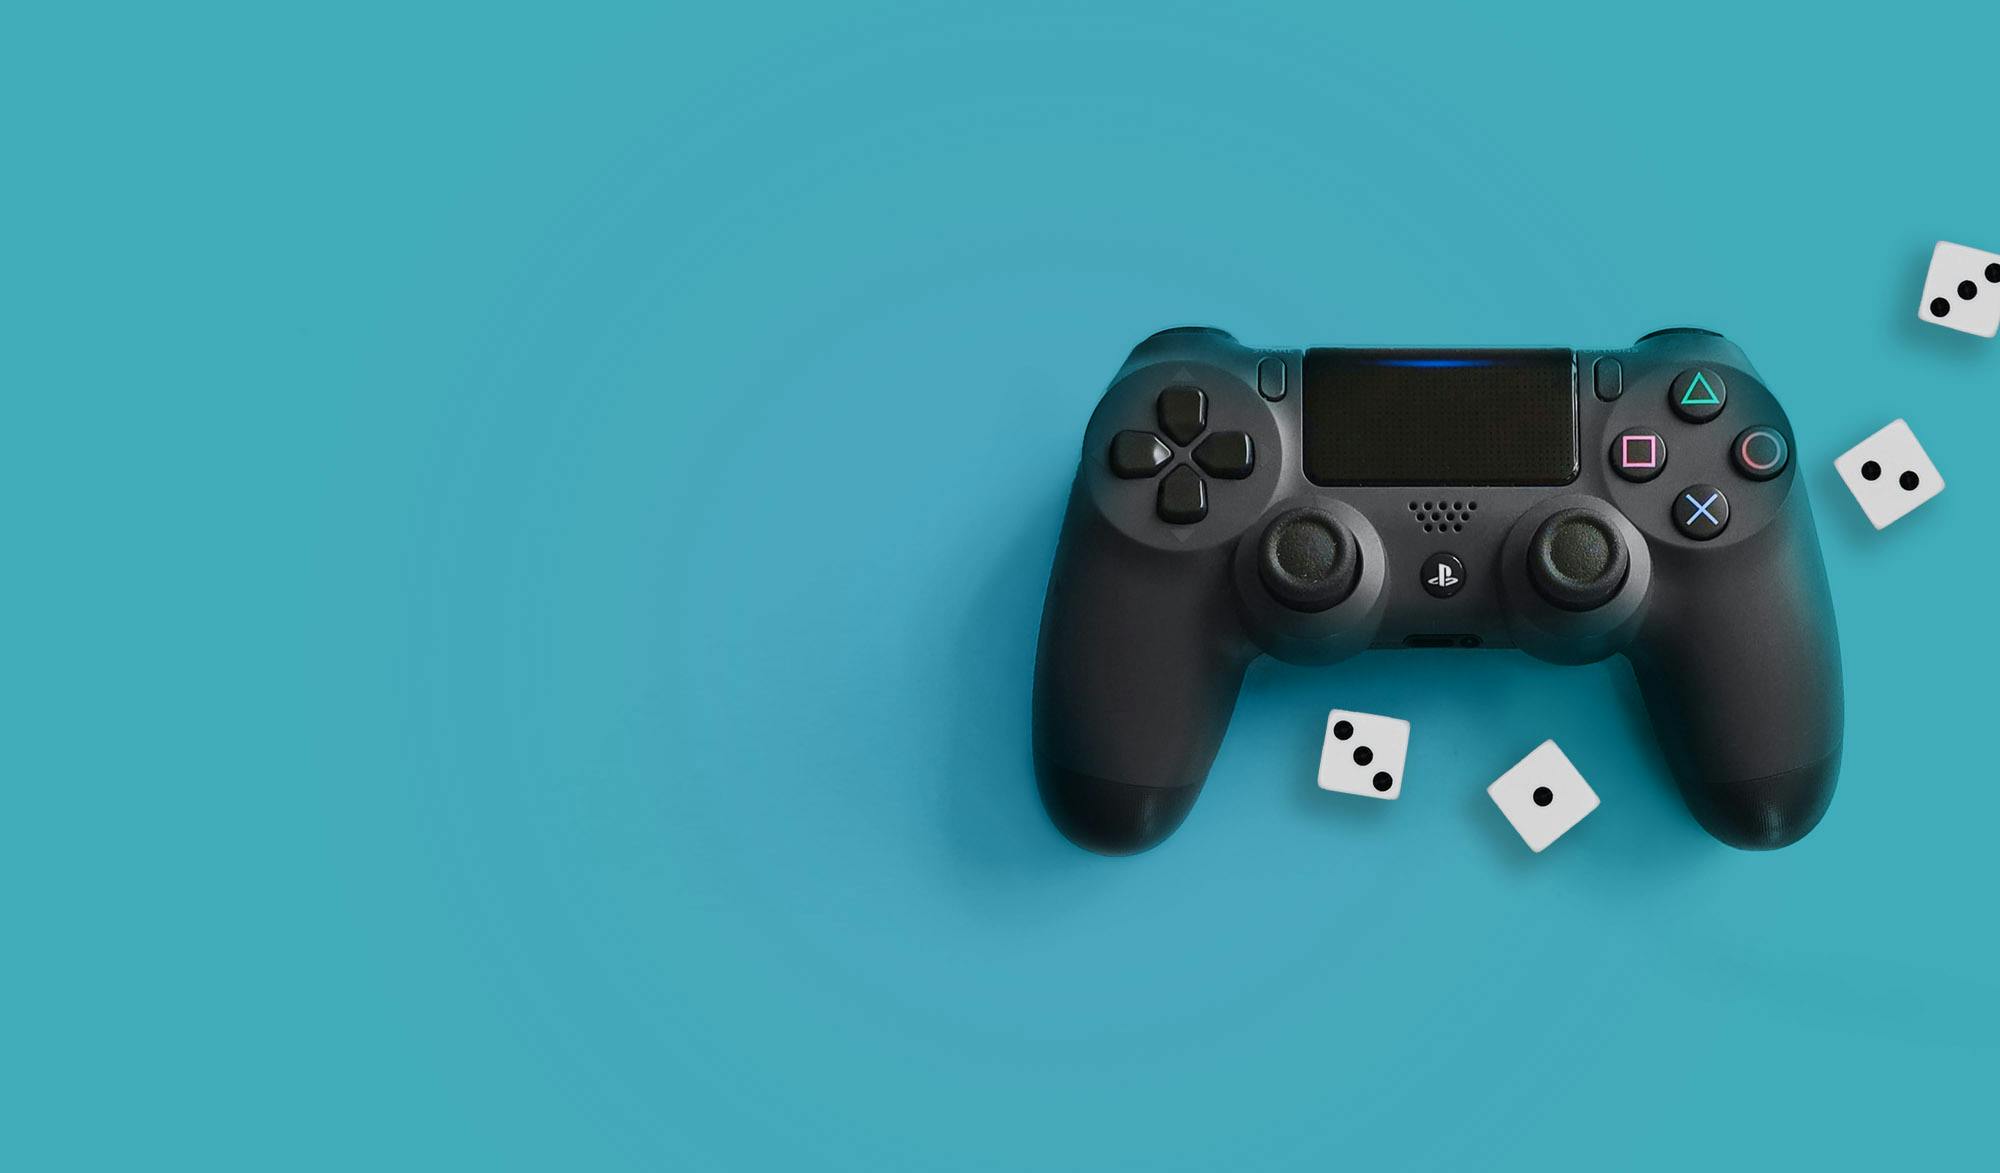 A PlayStation games controller and two white dice